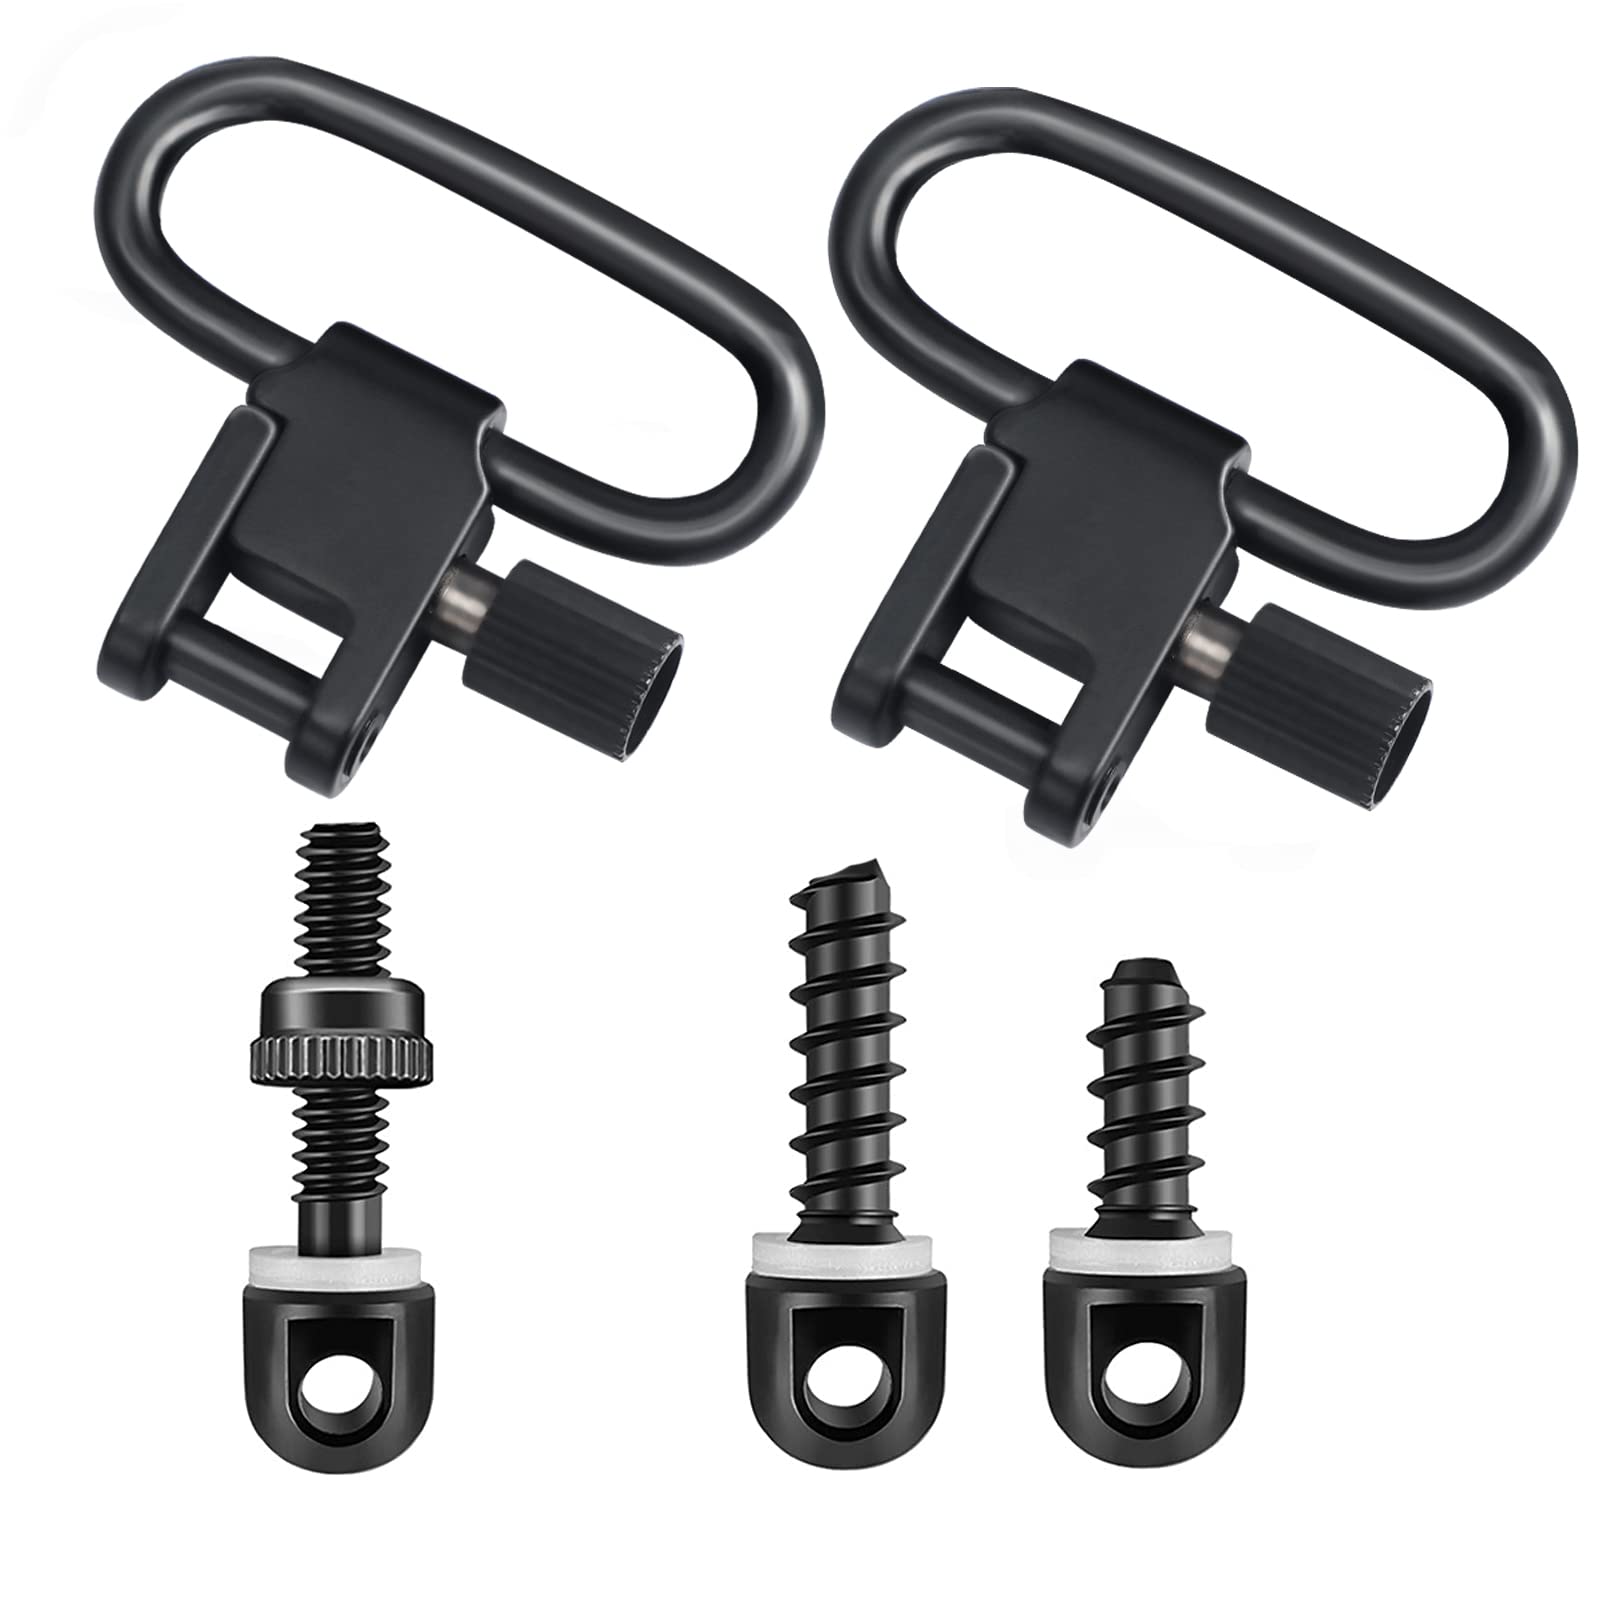 Anovo Two Point Traditional Sling Attachments Mounts with 3 Pieces